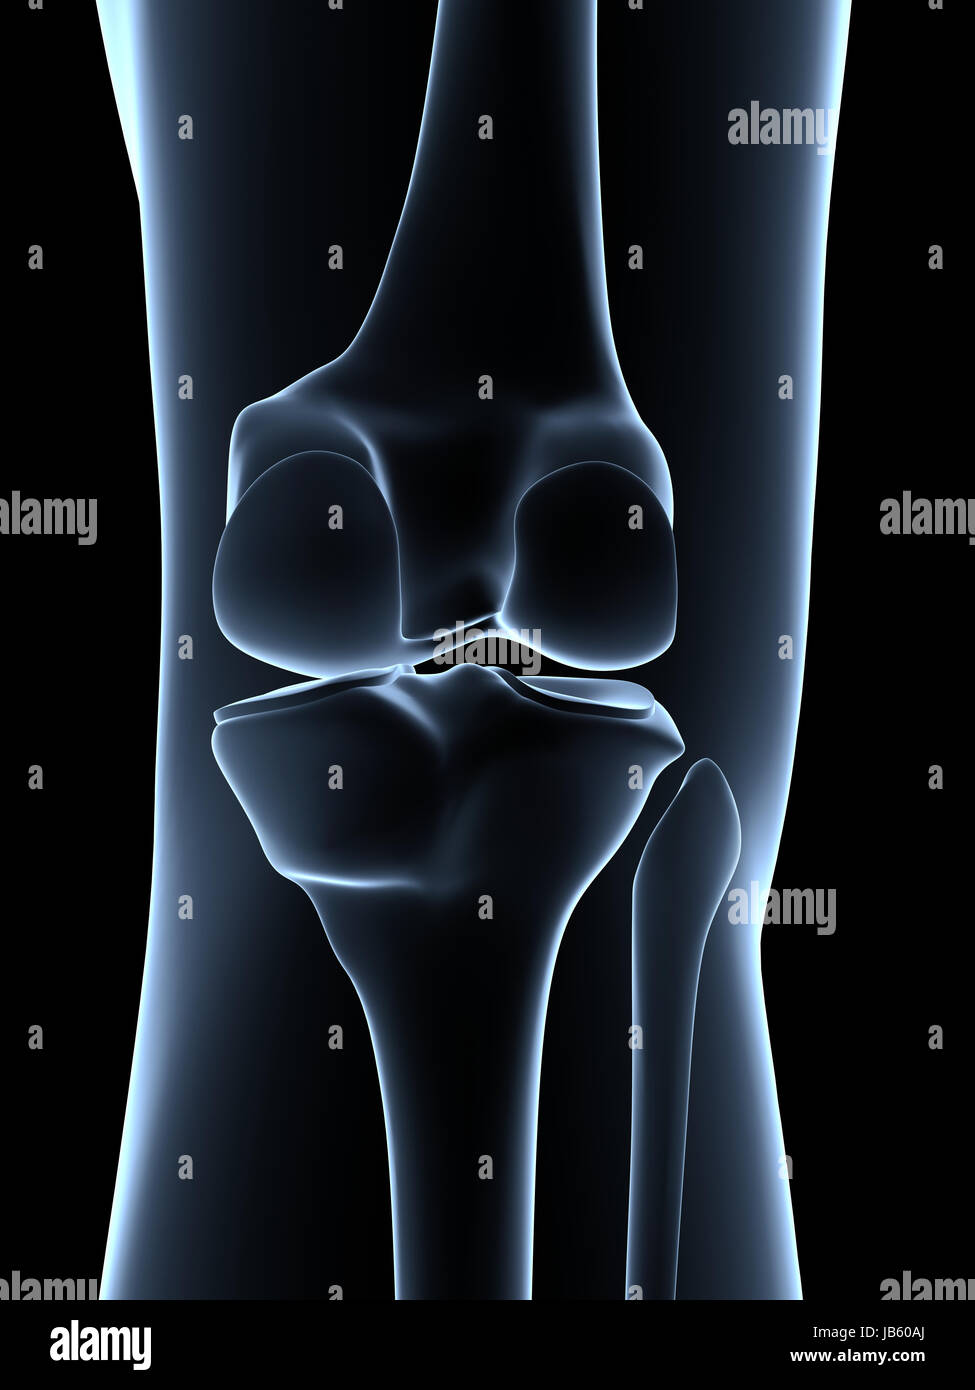 Knee Anatomy High Resolution Stock Photography and Images - Alamy